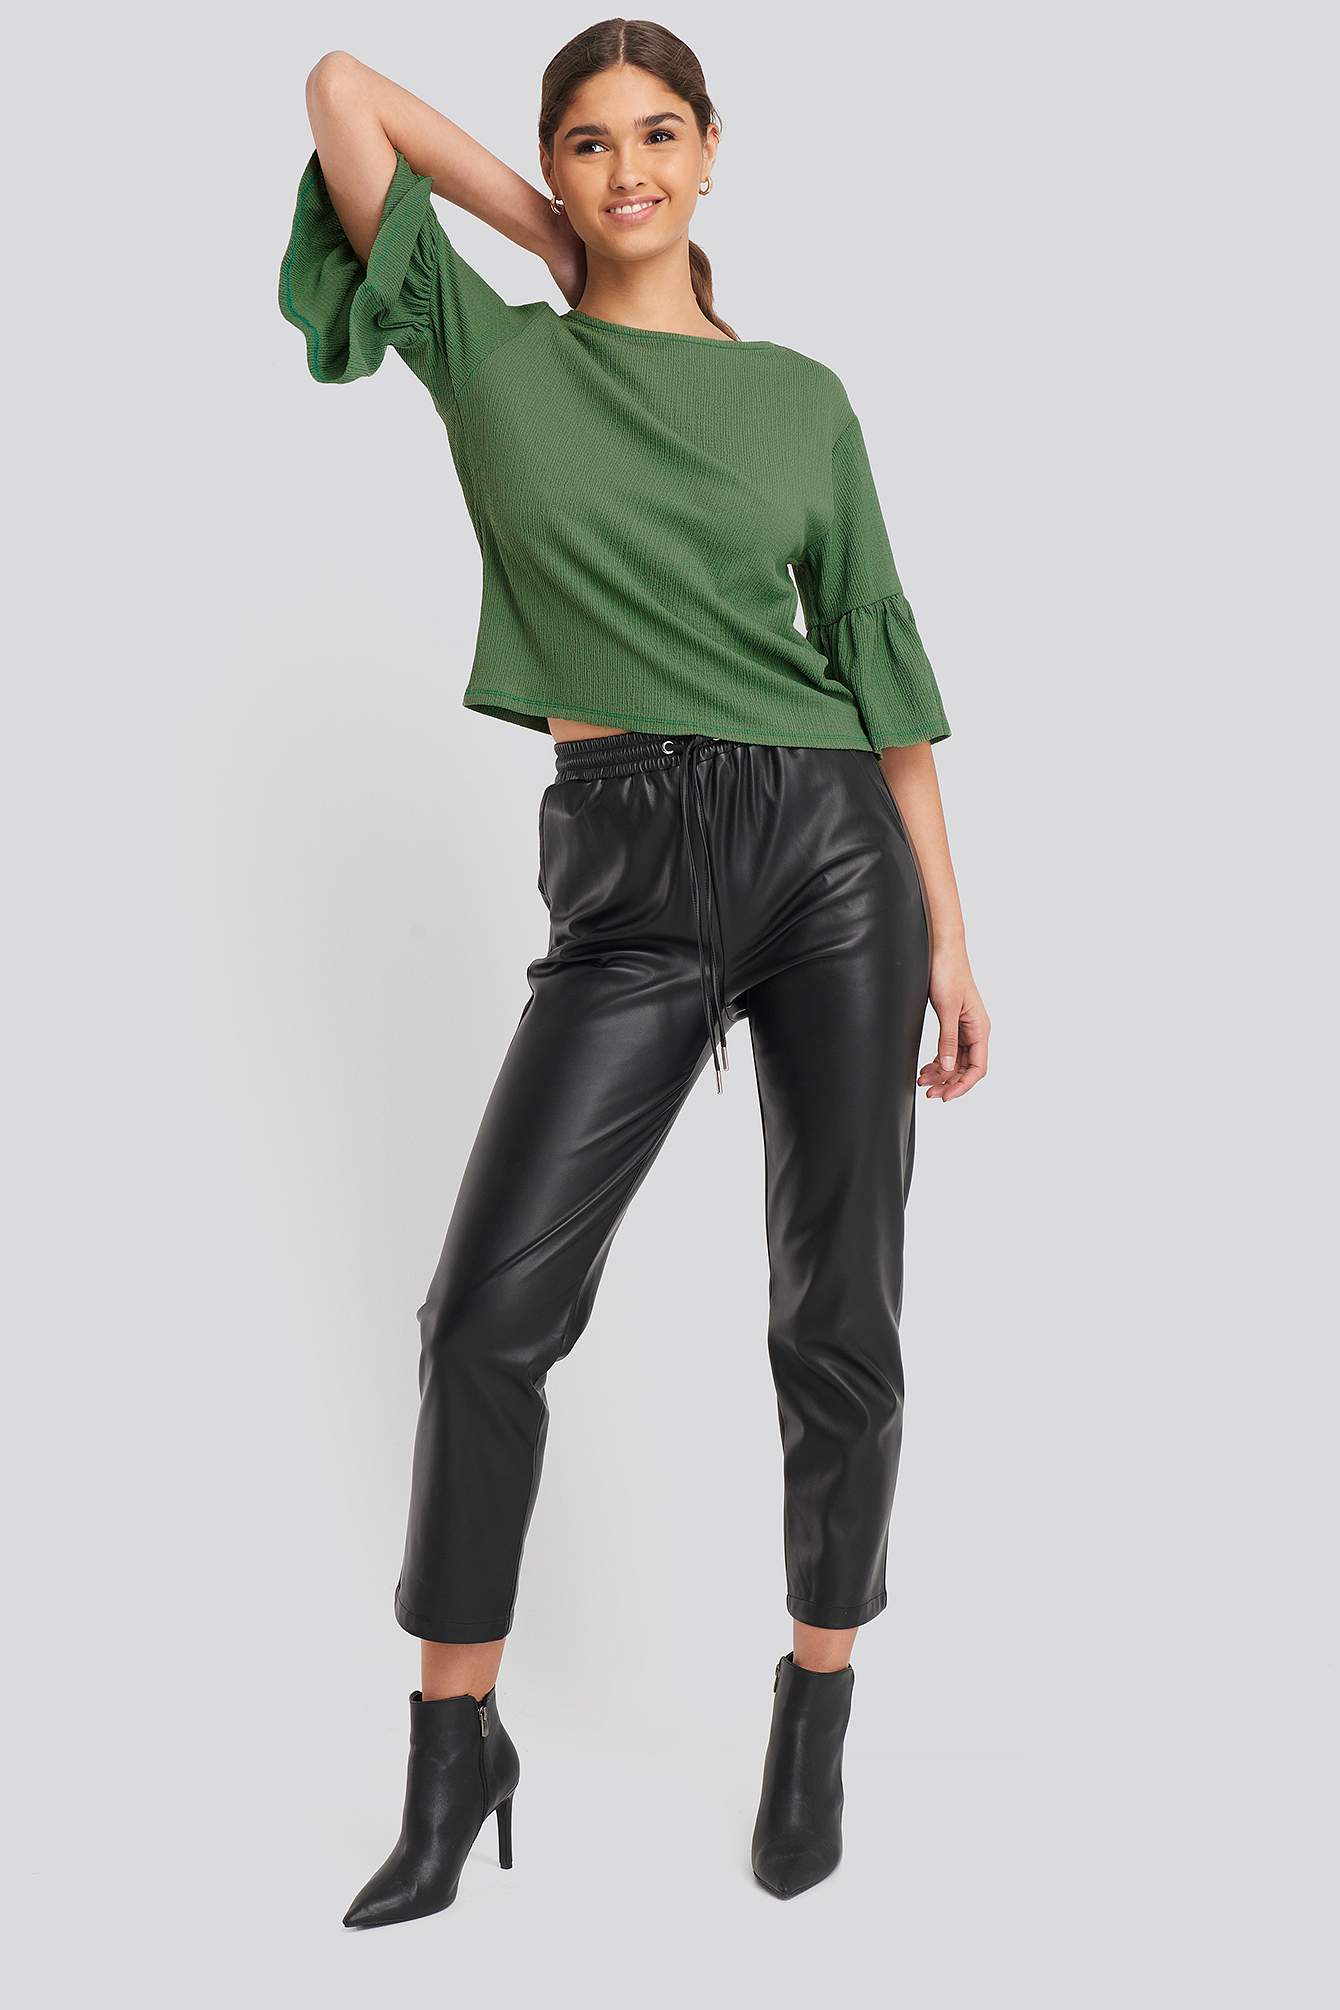 Green 3/4 Frill Sleeve Top